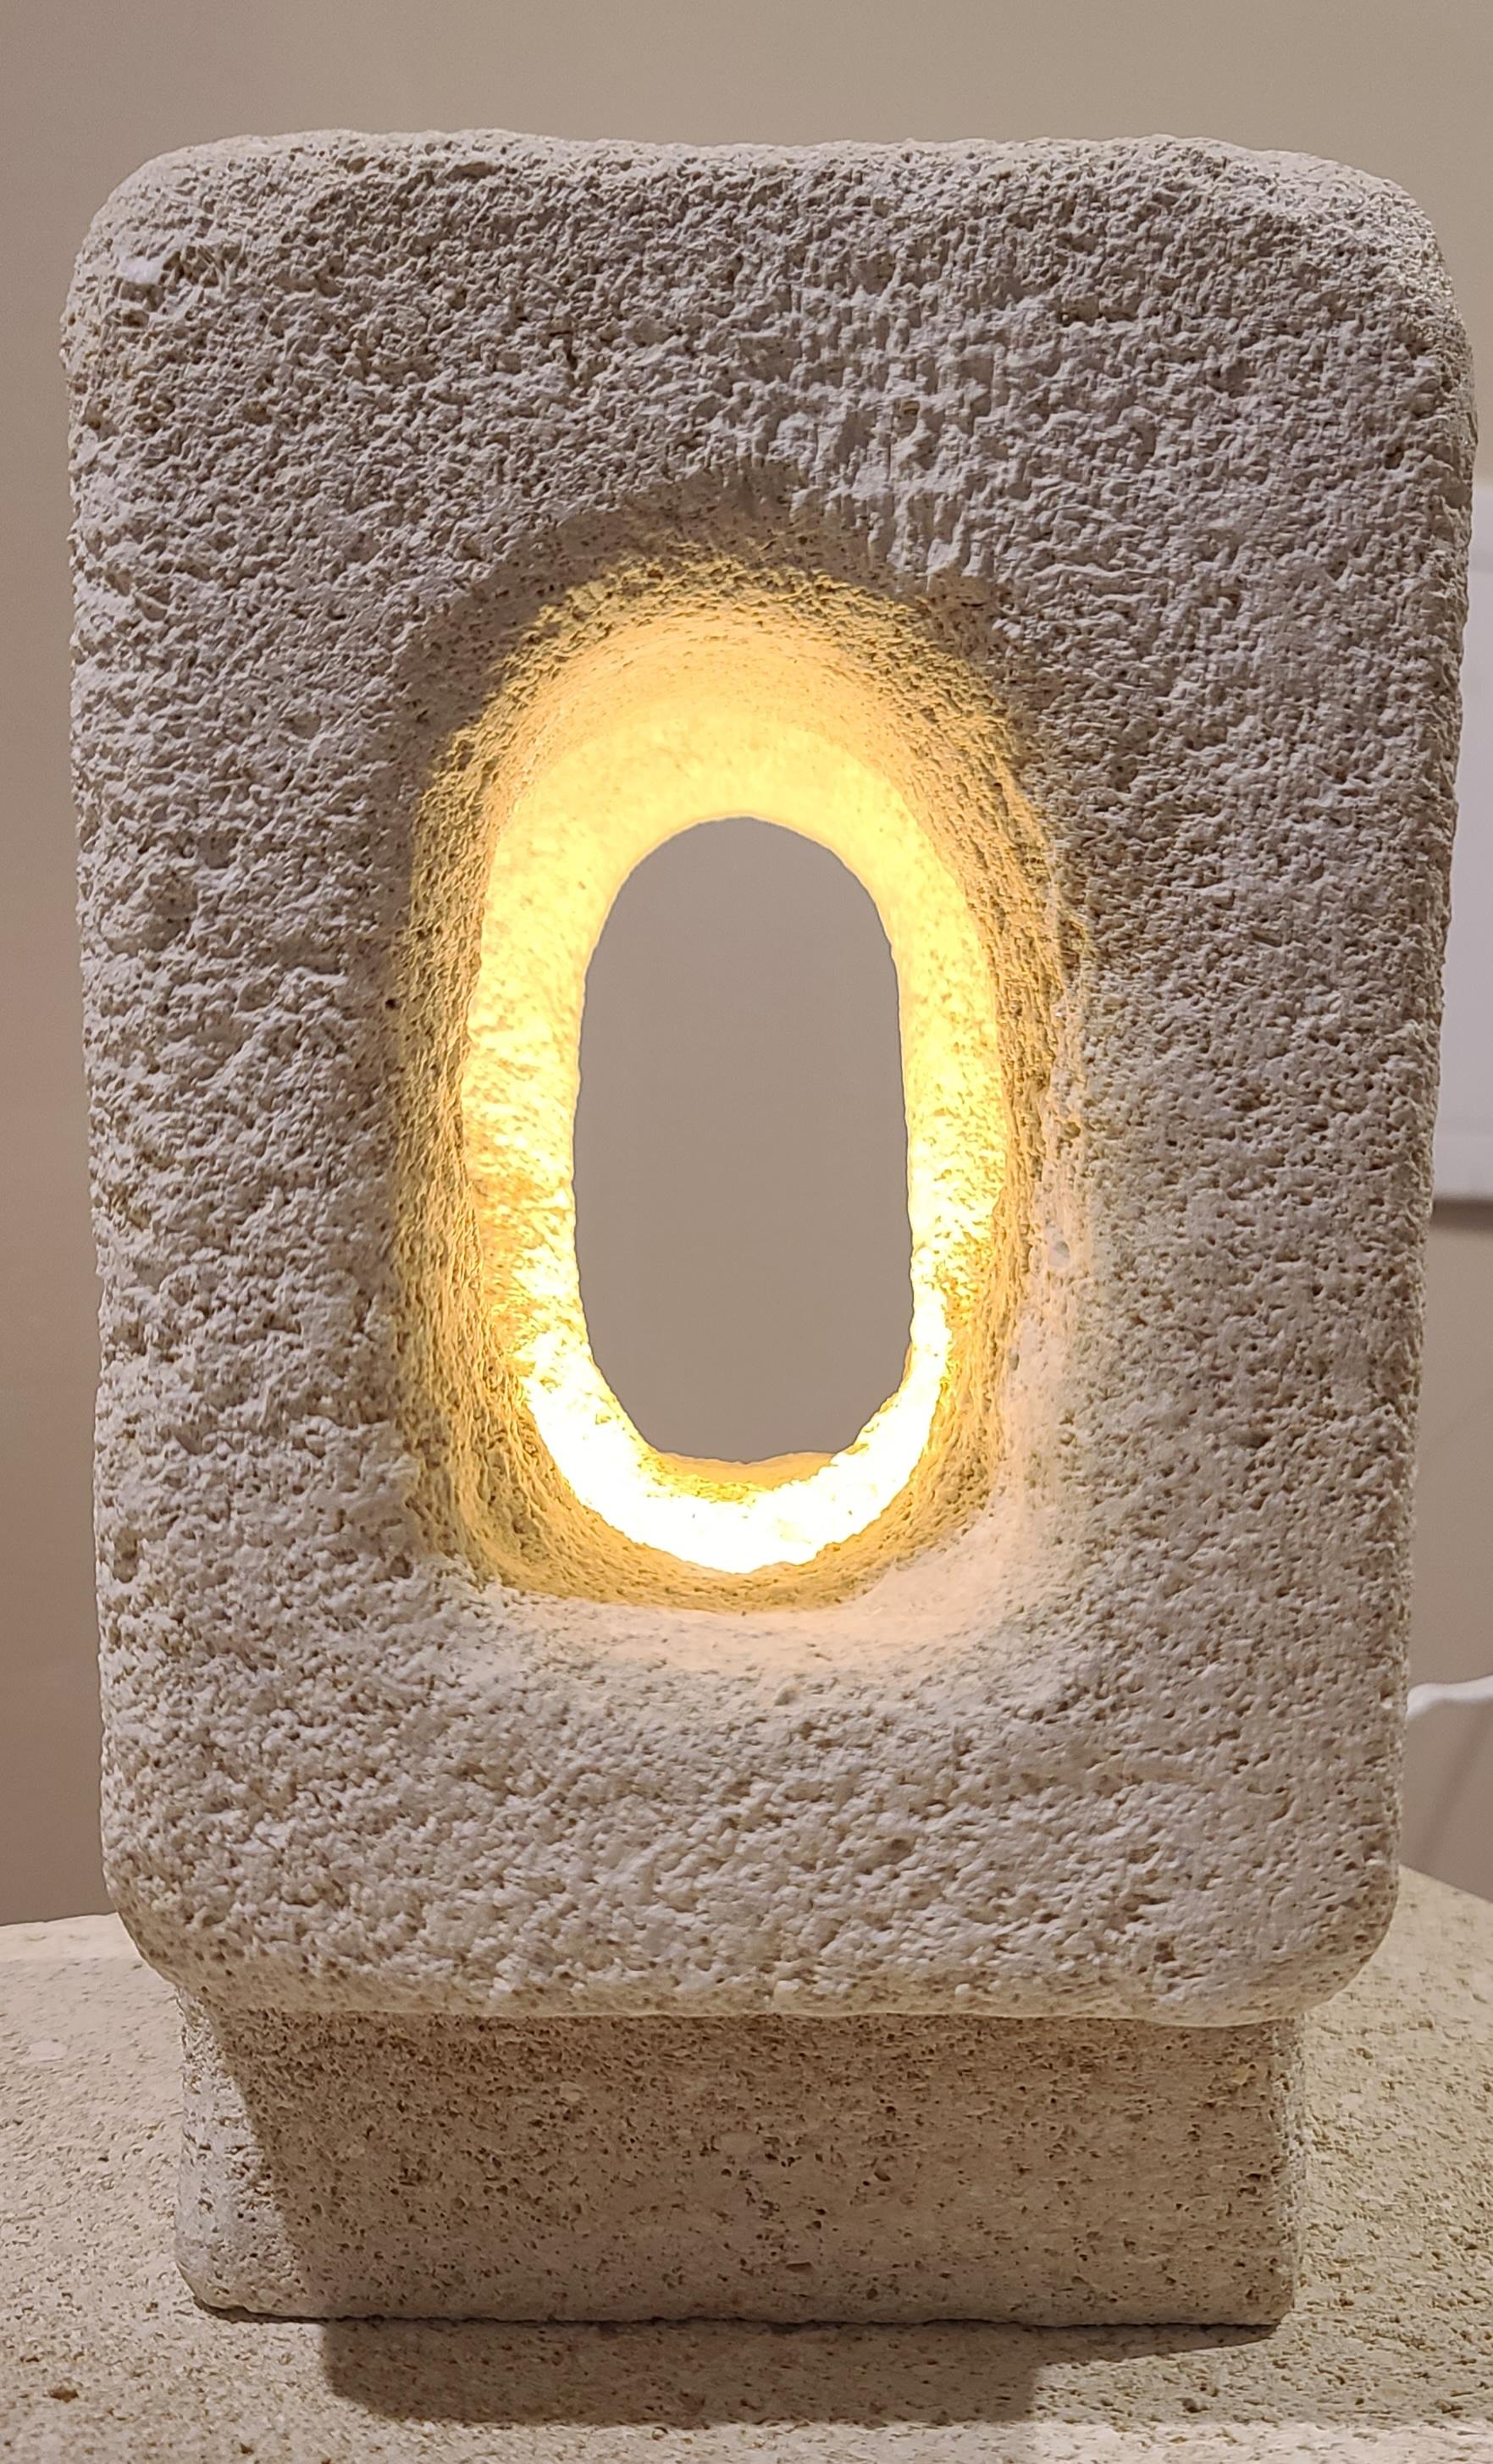 Hand-Crafted Square Sandstone Lamp For Sale